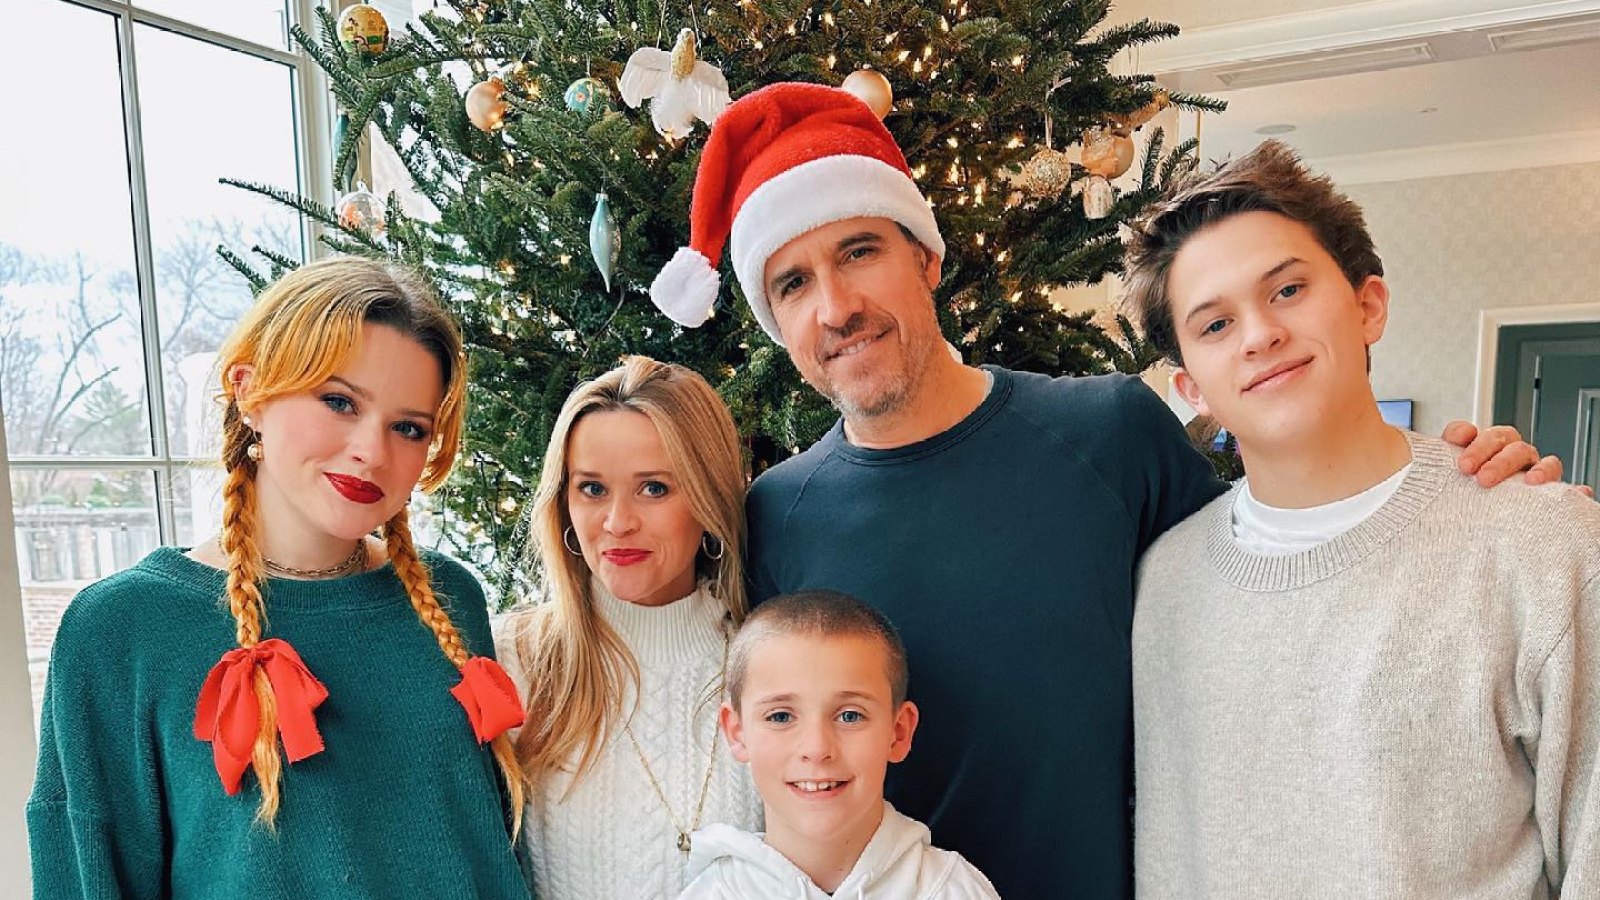 Reese Witherspoon Shared Sweet Family Photos With Husband Jim Toth 2 Months Before Announcing Their Split: 'Welcoming 2023'